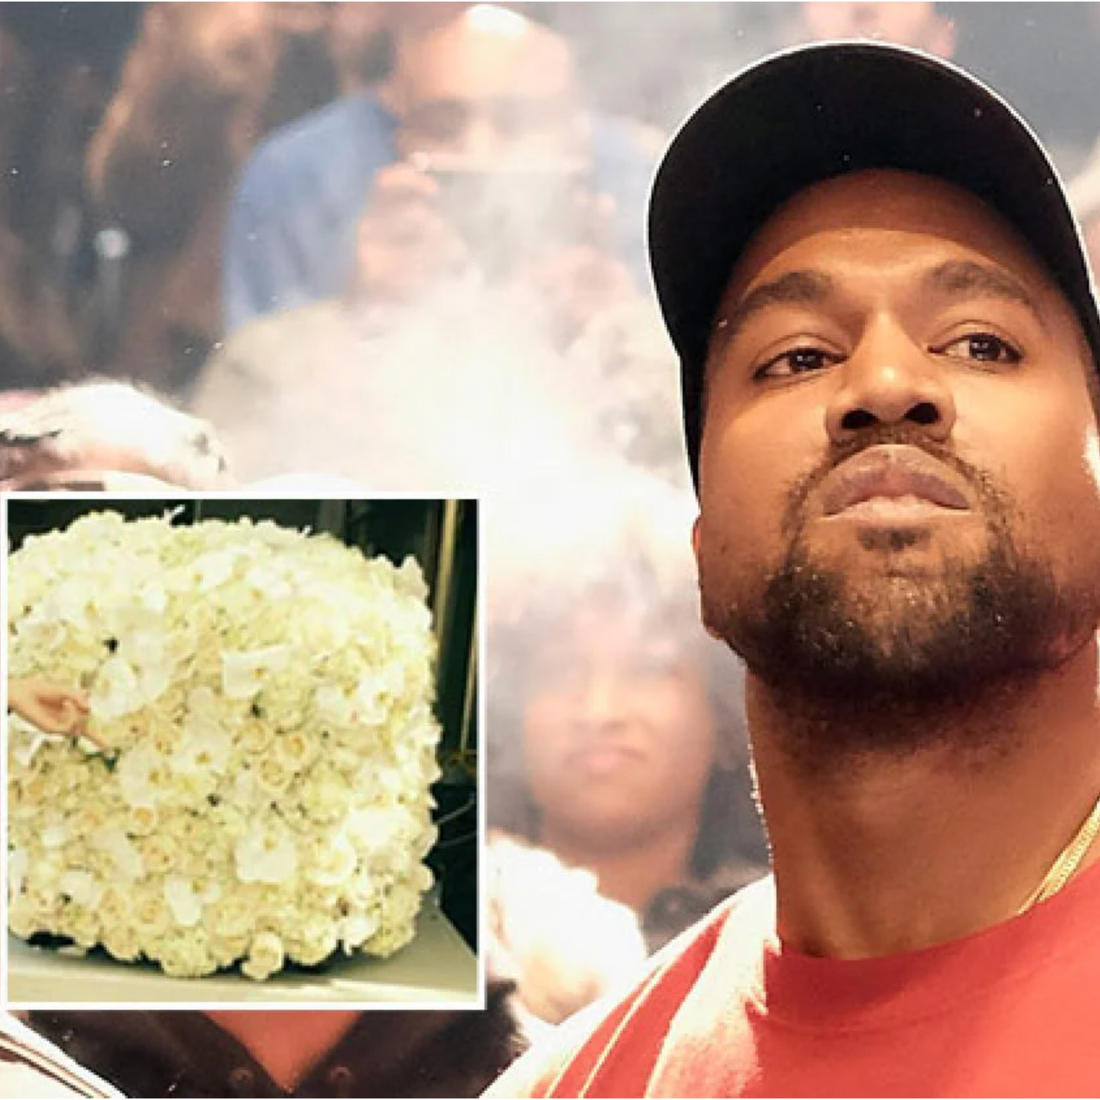 SLATE: An Interview With the Florist Who Makes Those Flower Cubes That Kanye West Sent to Taylor Swift and James Corden